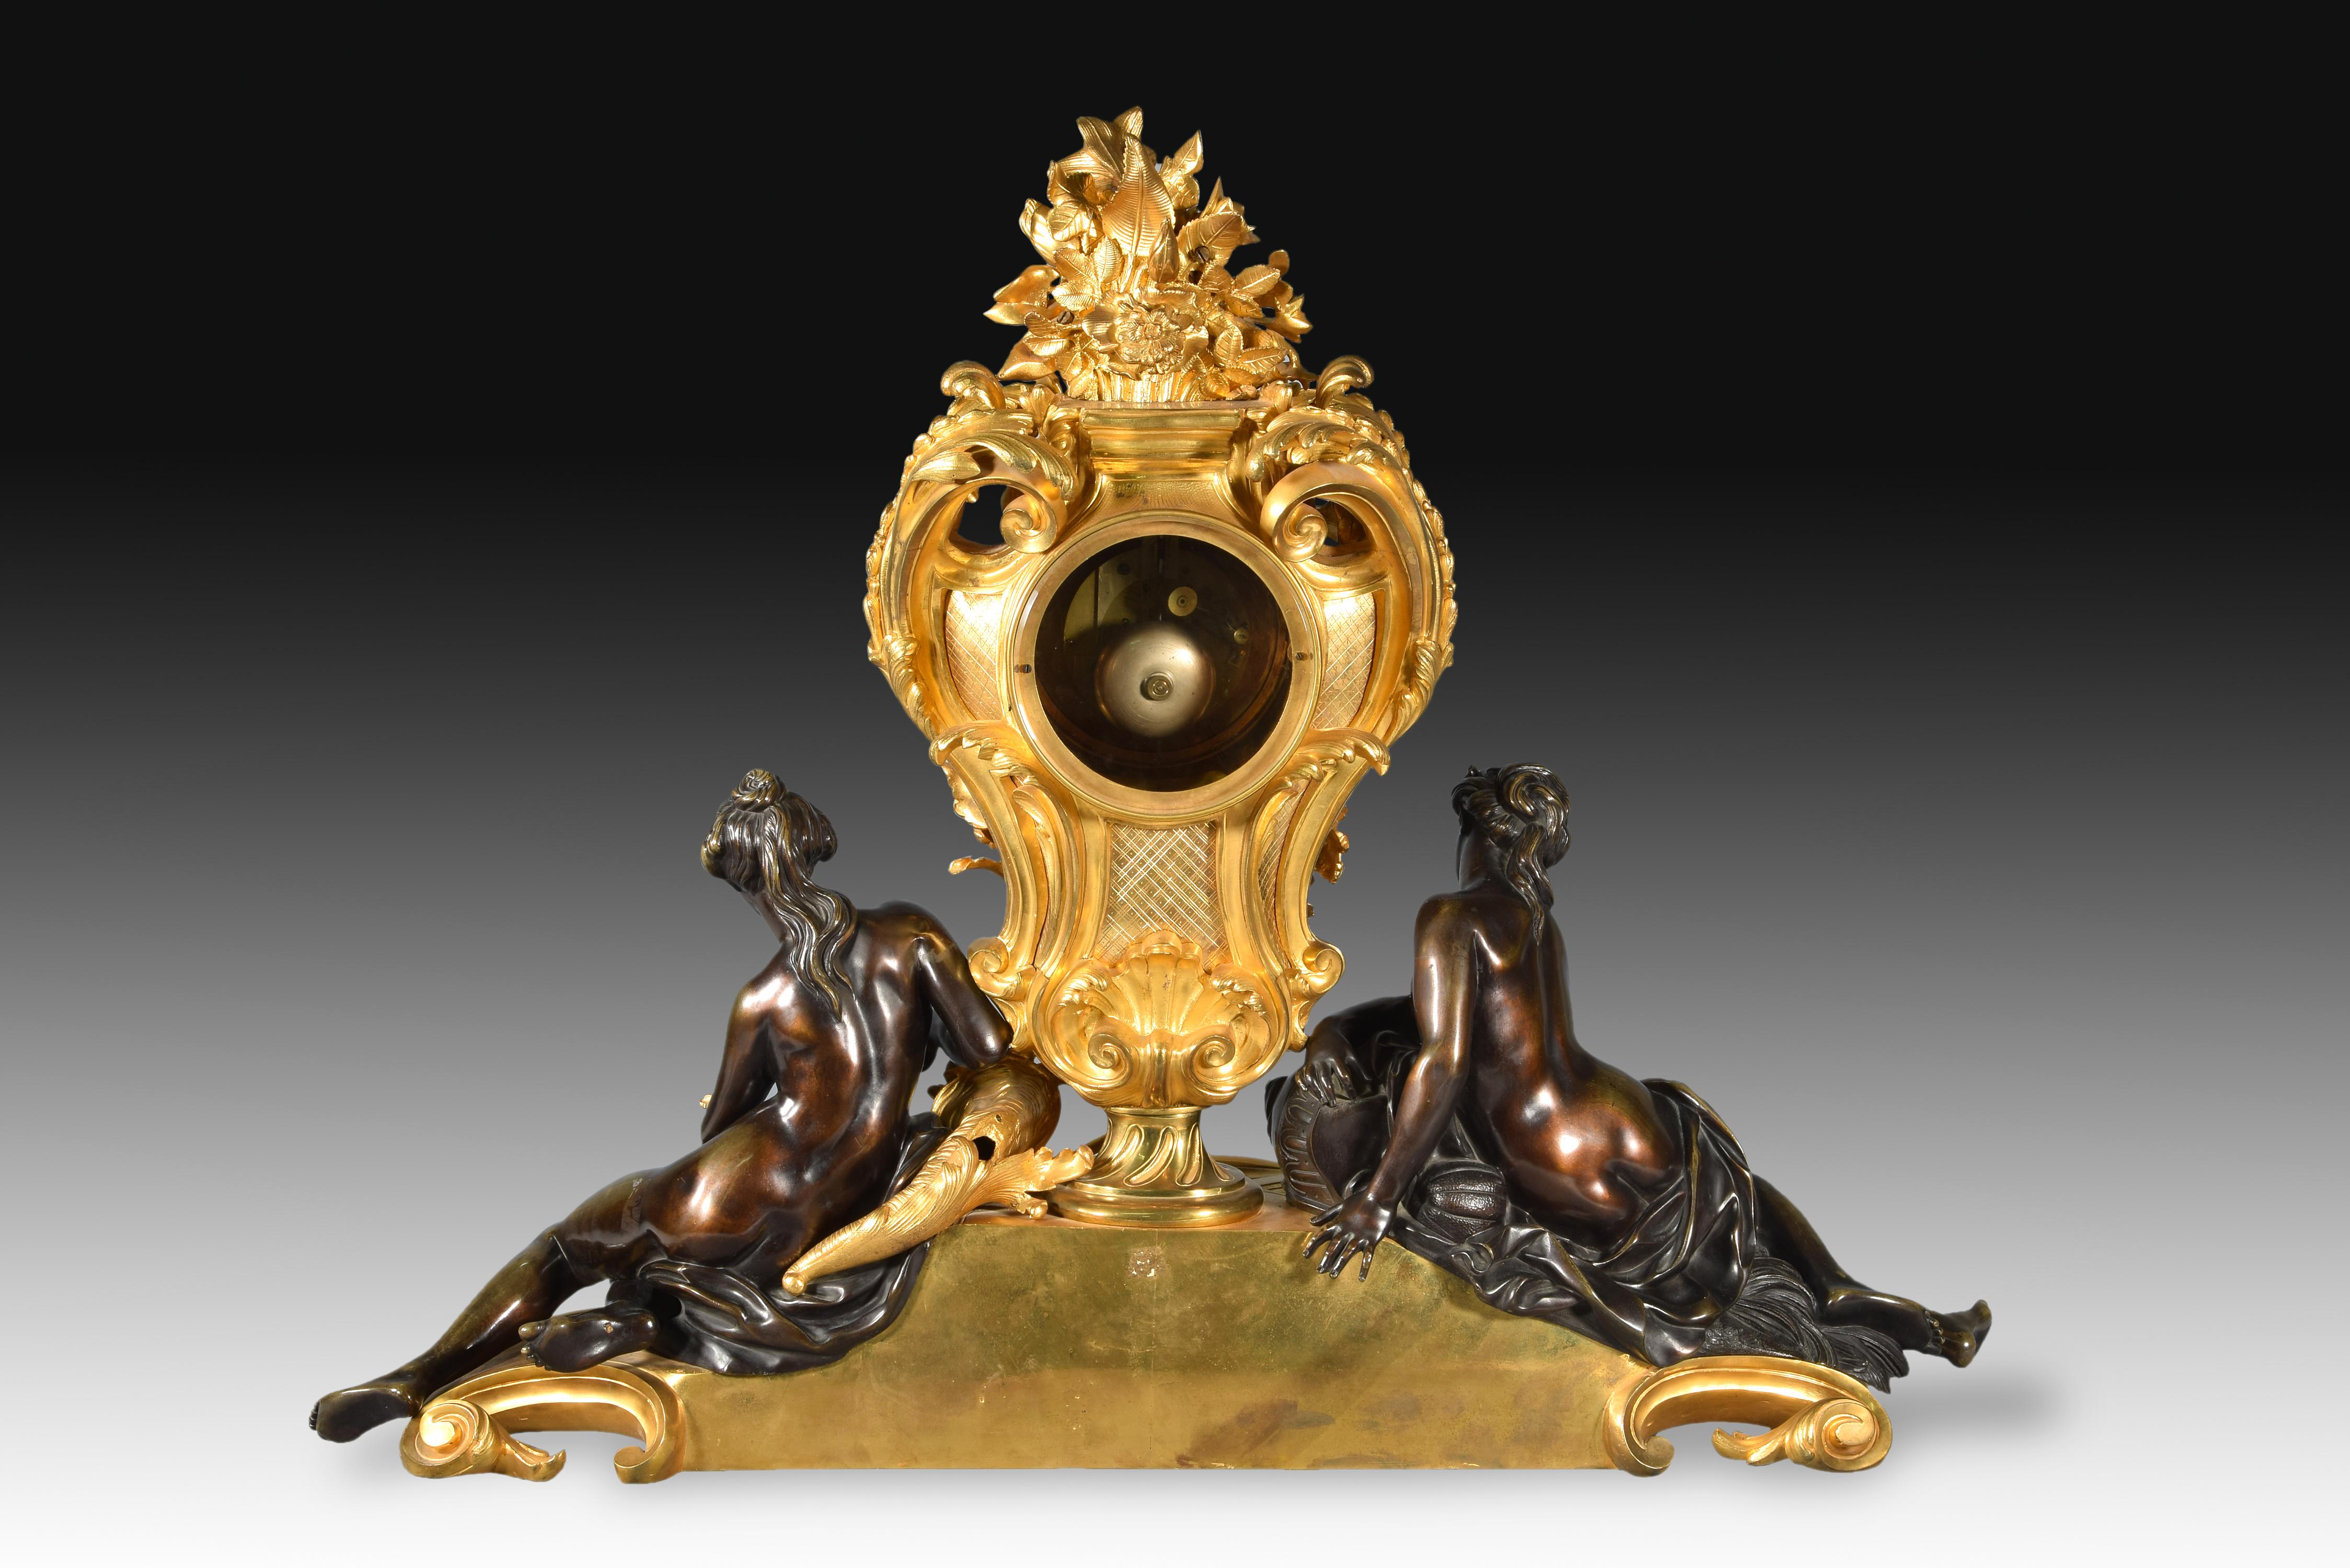 Table clock. Golden and blued bronze. Marquis, Paris, France, 19th century.
Large table clock with a blued and gilt bronze case,white dial with black Roman numerals for hours andblack Arabic numerals every five for minutes, Louis XVstyle hands and